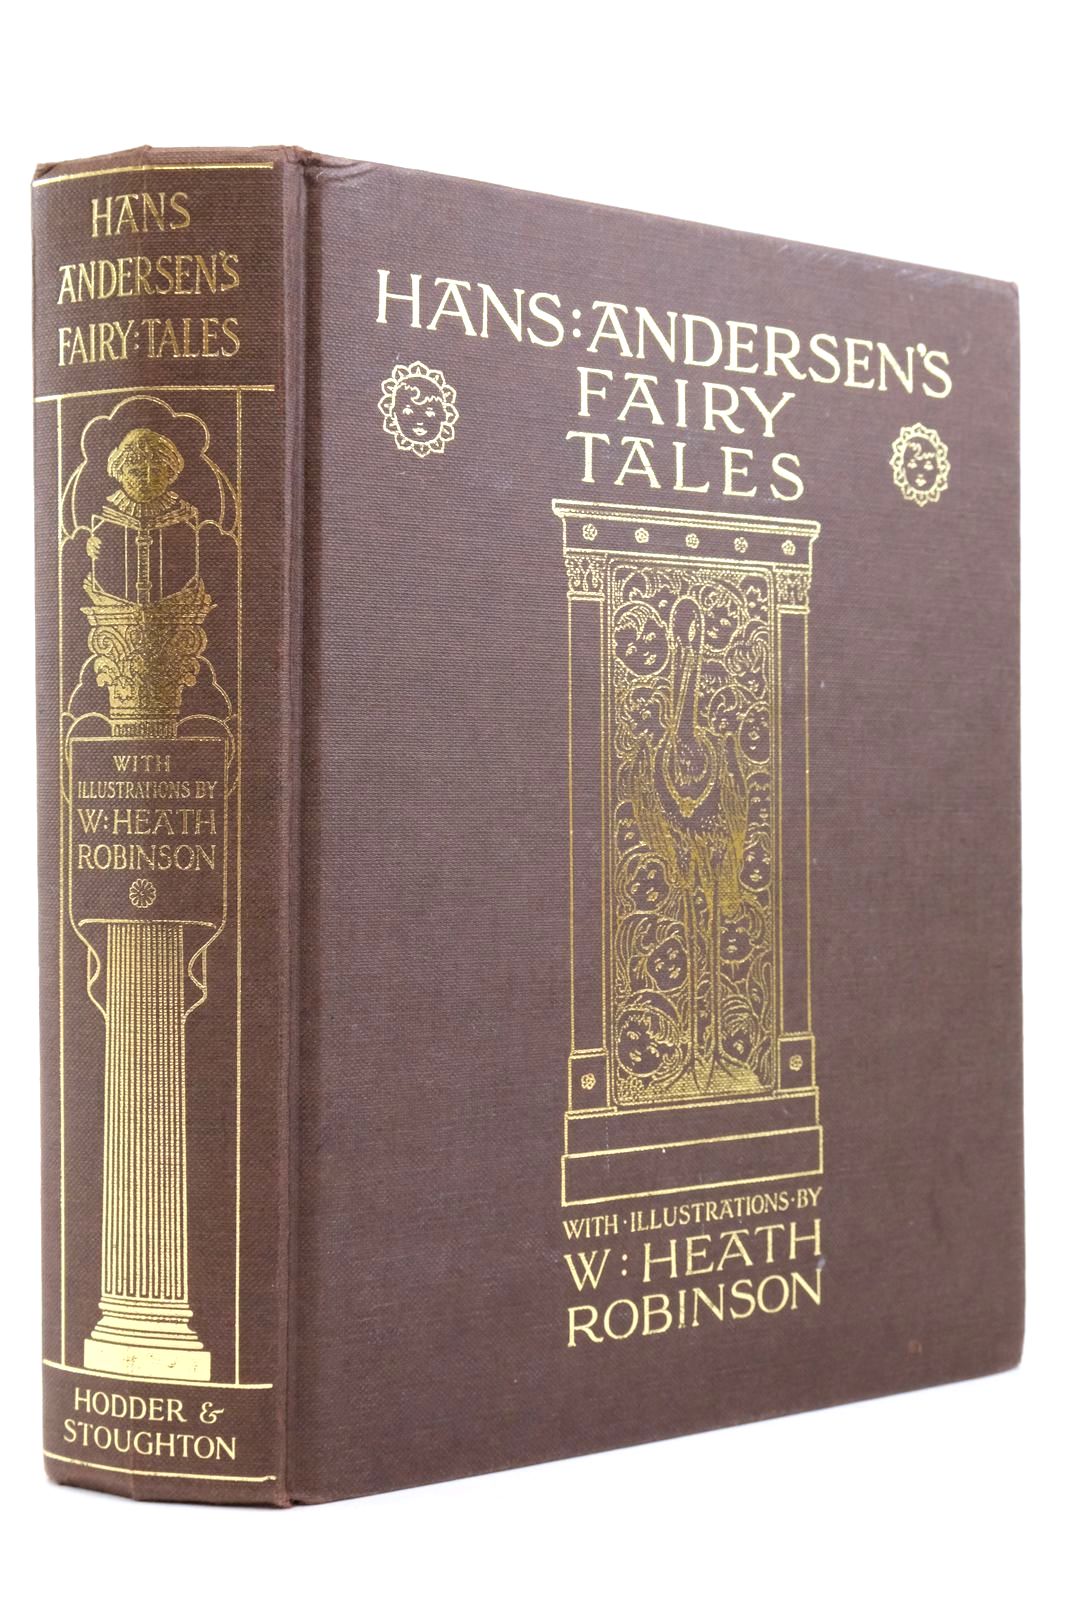 Photo of HANS ANDERSEN'S FAIRY TALES written by Andersen, Hans Christian illustrated by Robinson, W. Heath published by Hodder & Stoughton (STOCK CODE: 2135971)  for sale by Stella & Rose's Books